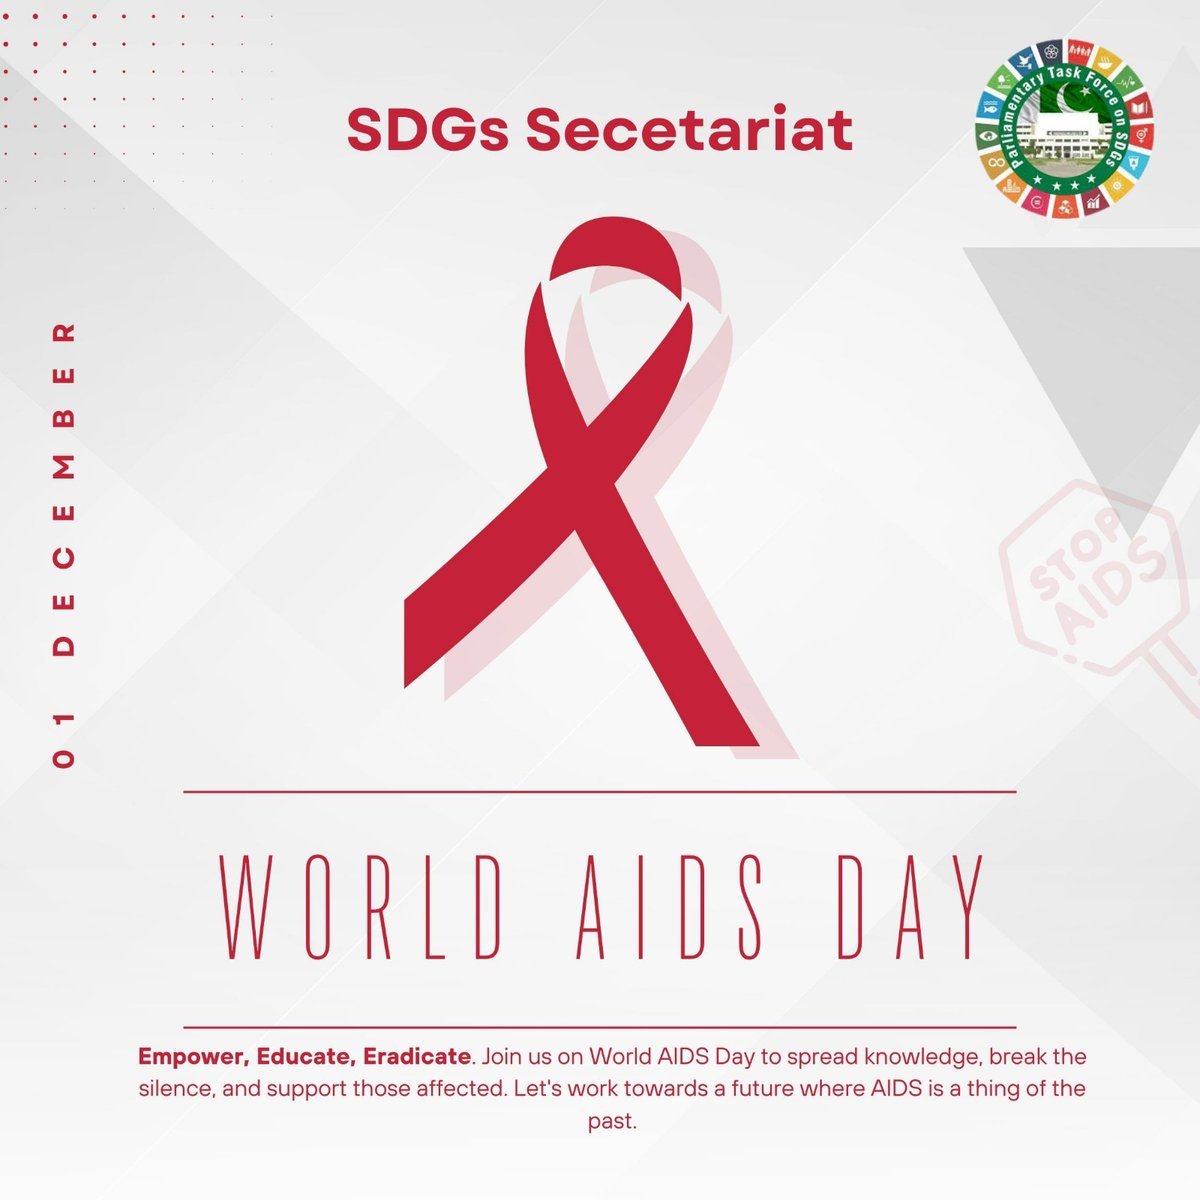 Empower, Educate, Eradicate. Join us on World AIDS Day to spread knowledge, break the silence, and support those affected. Let's work towards a future where AIDS is a thing of the past. #aidsday2023